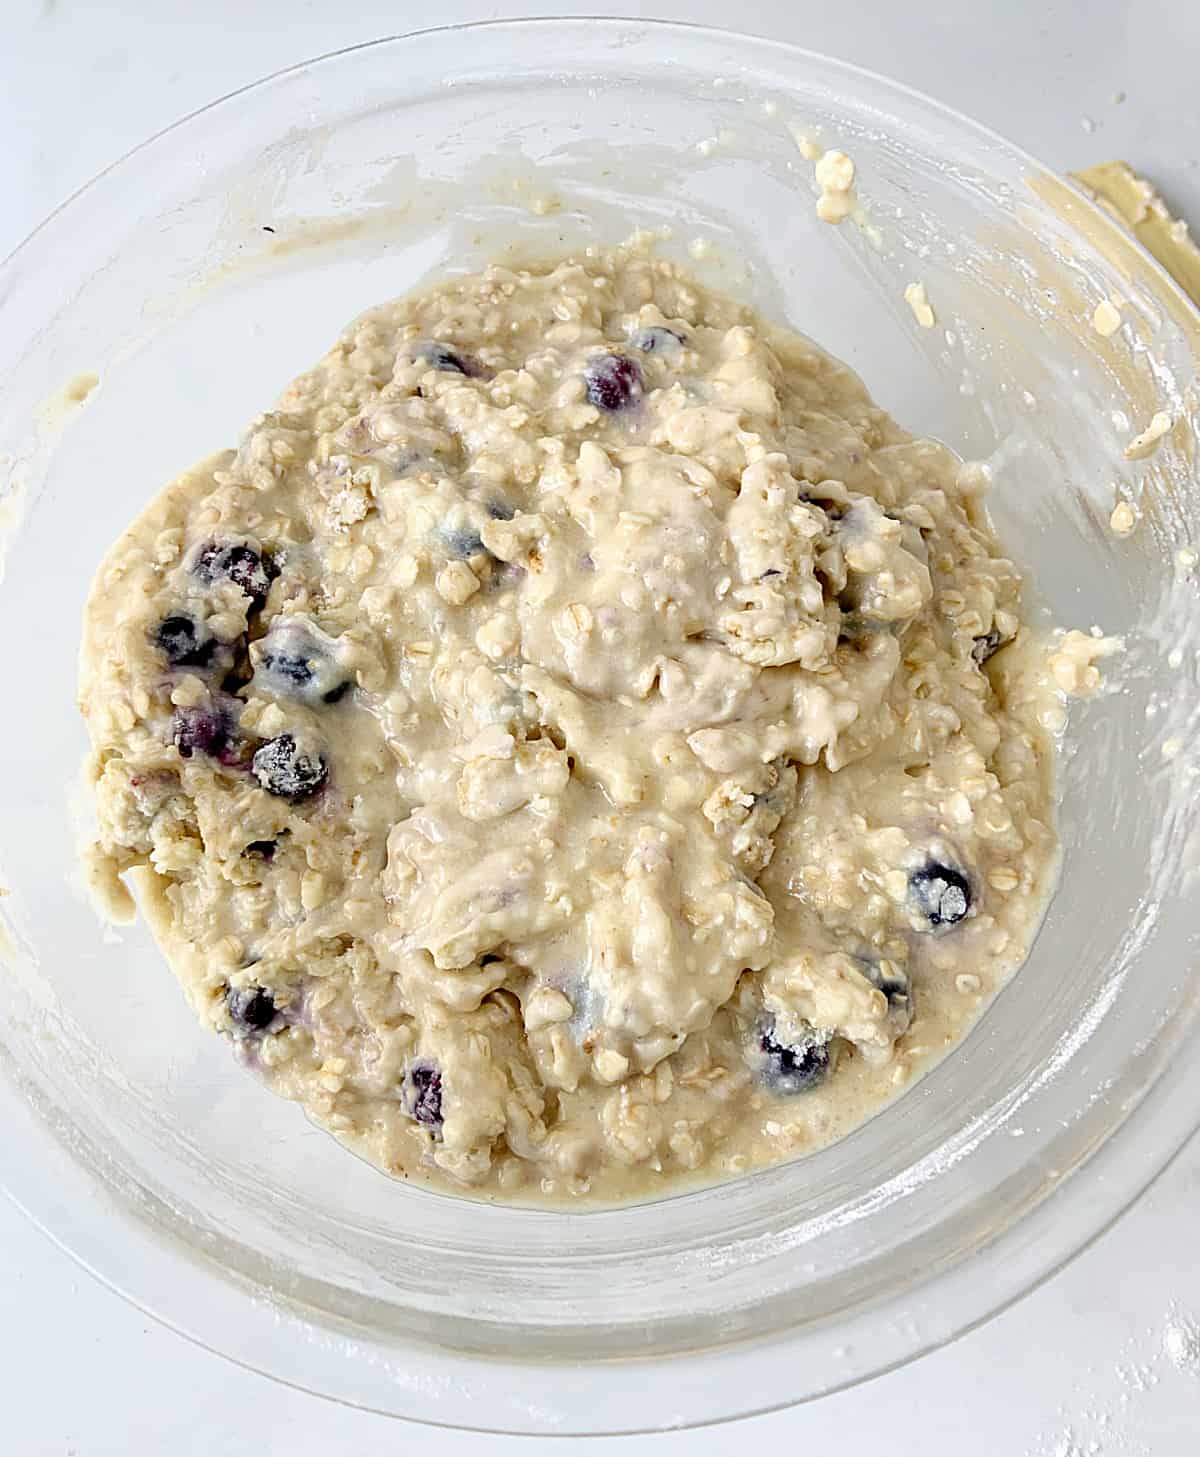 Mixed muffin batter with blueberries in a glass bowl on a white surface.